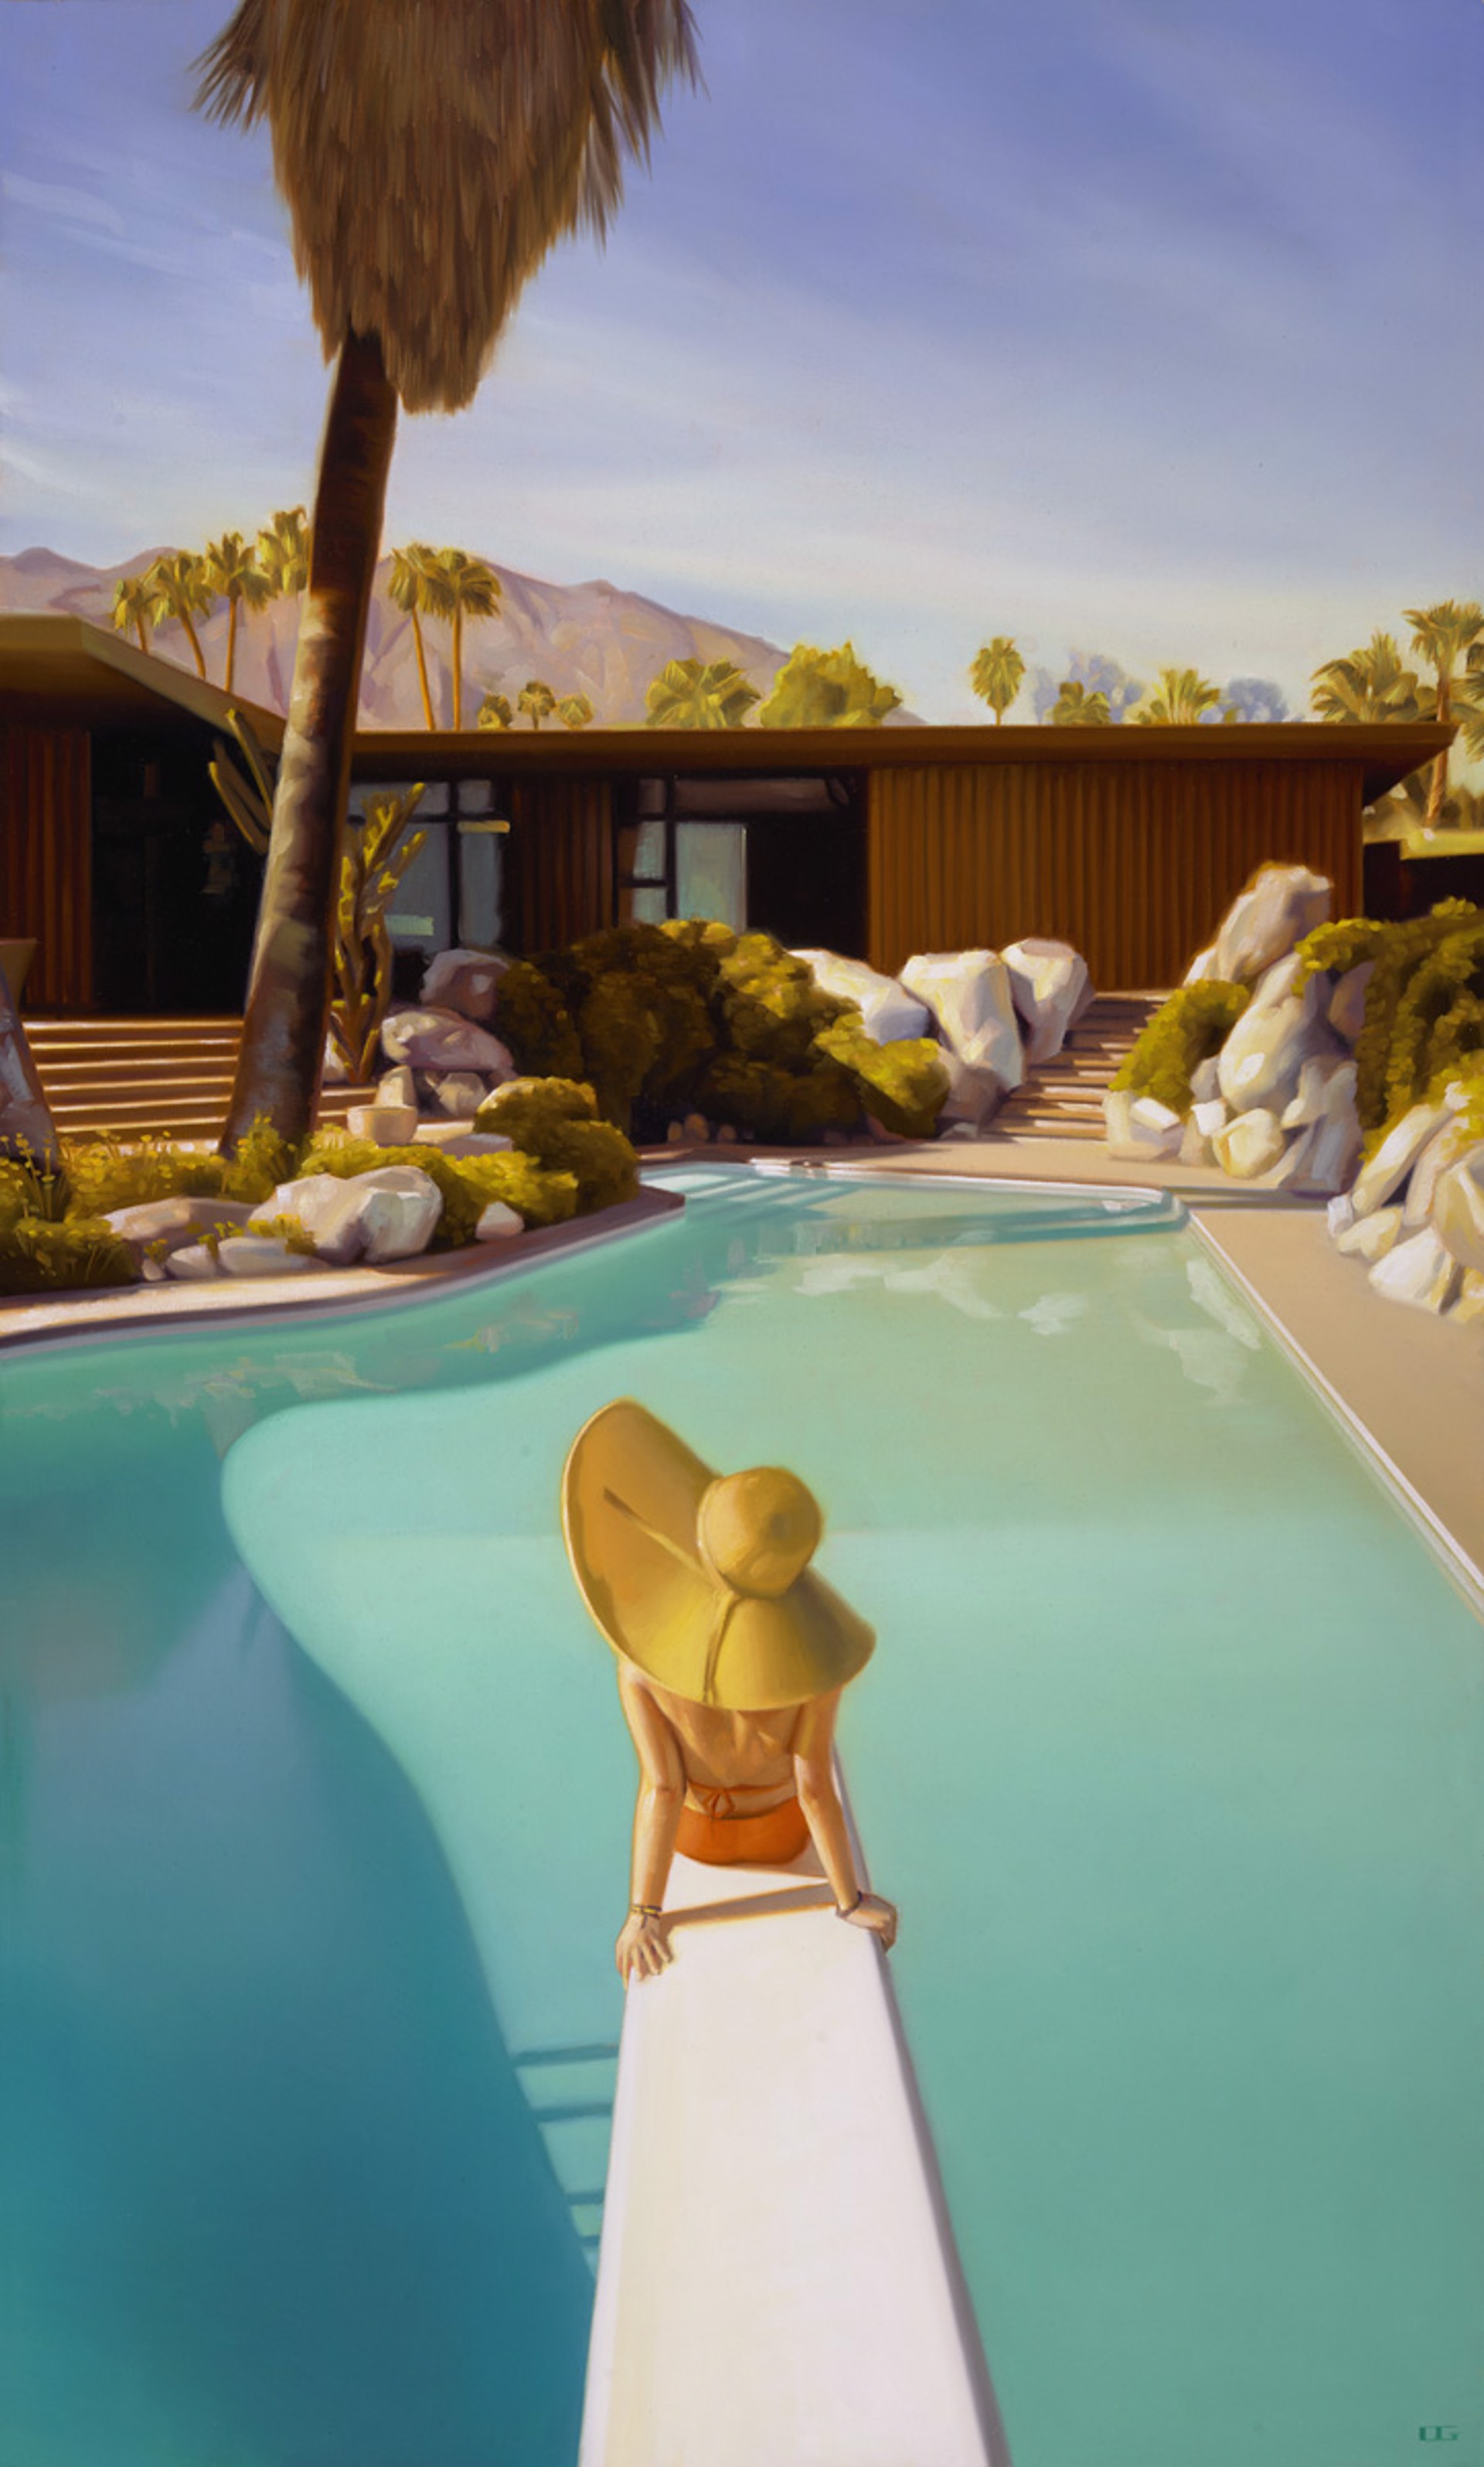 Desert Style by Carrie Graber